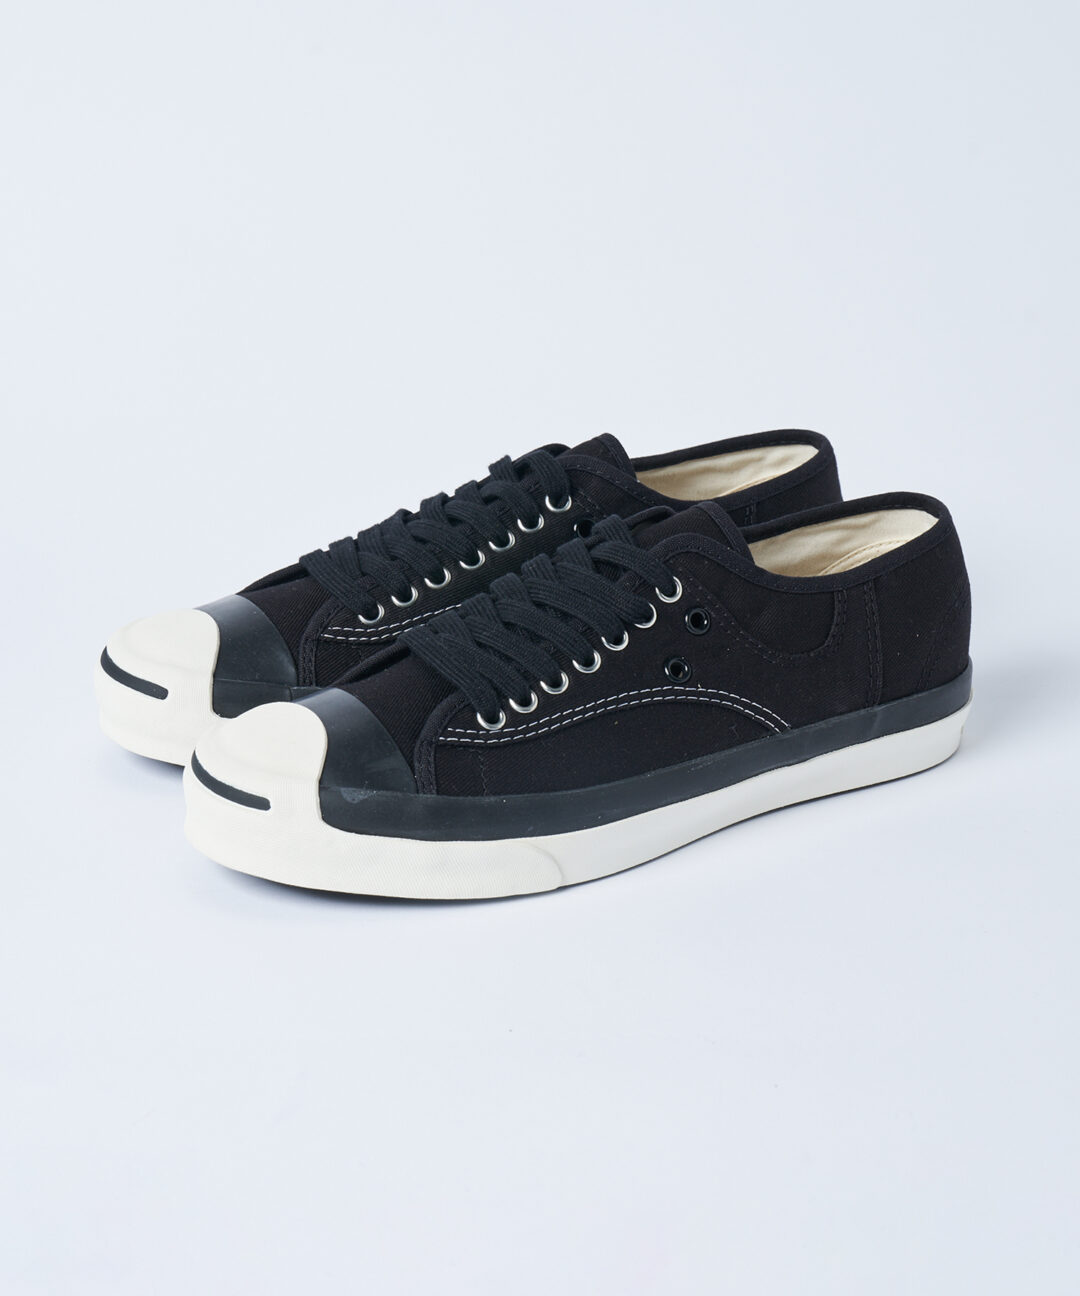 CONVERSE JACK PURCELL for BIOTOP 第9弾「JACK PURCELL RET RLY / BT」が1/26発売 (コンバース ビオトープ ジャック パーセル)